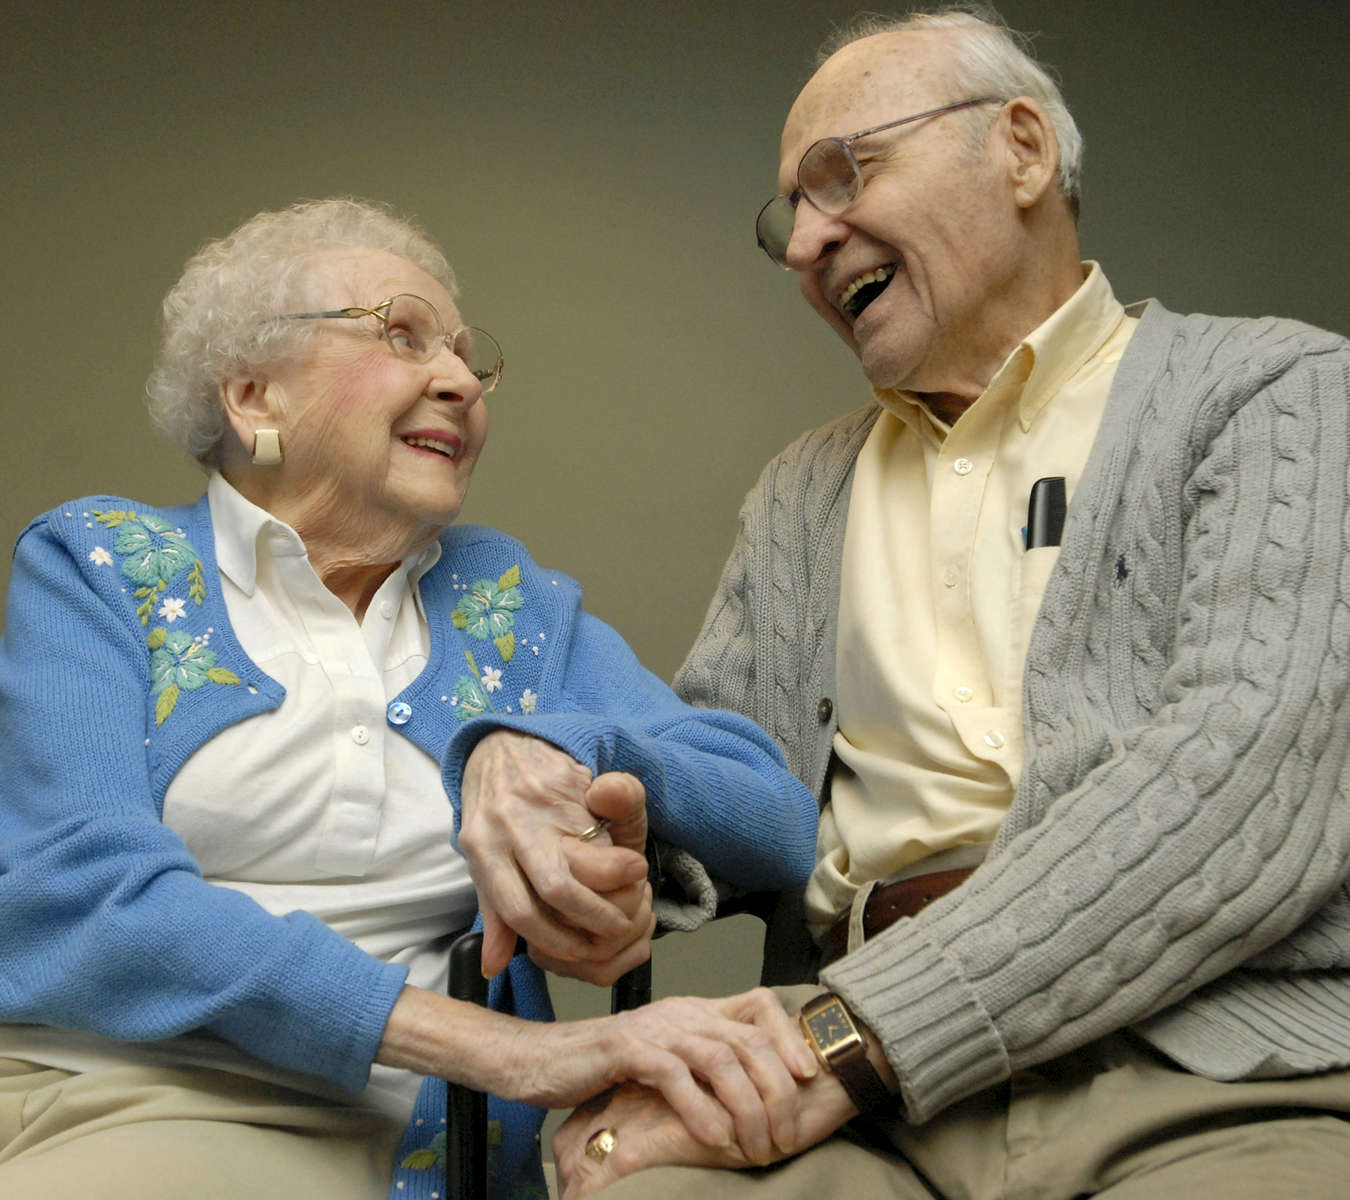 Betty and John Archer have been married for 70 years and live at the Blenheim-Newport Senior Living Community.